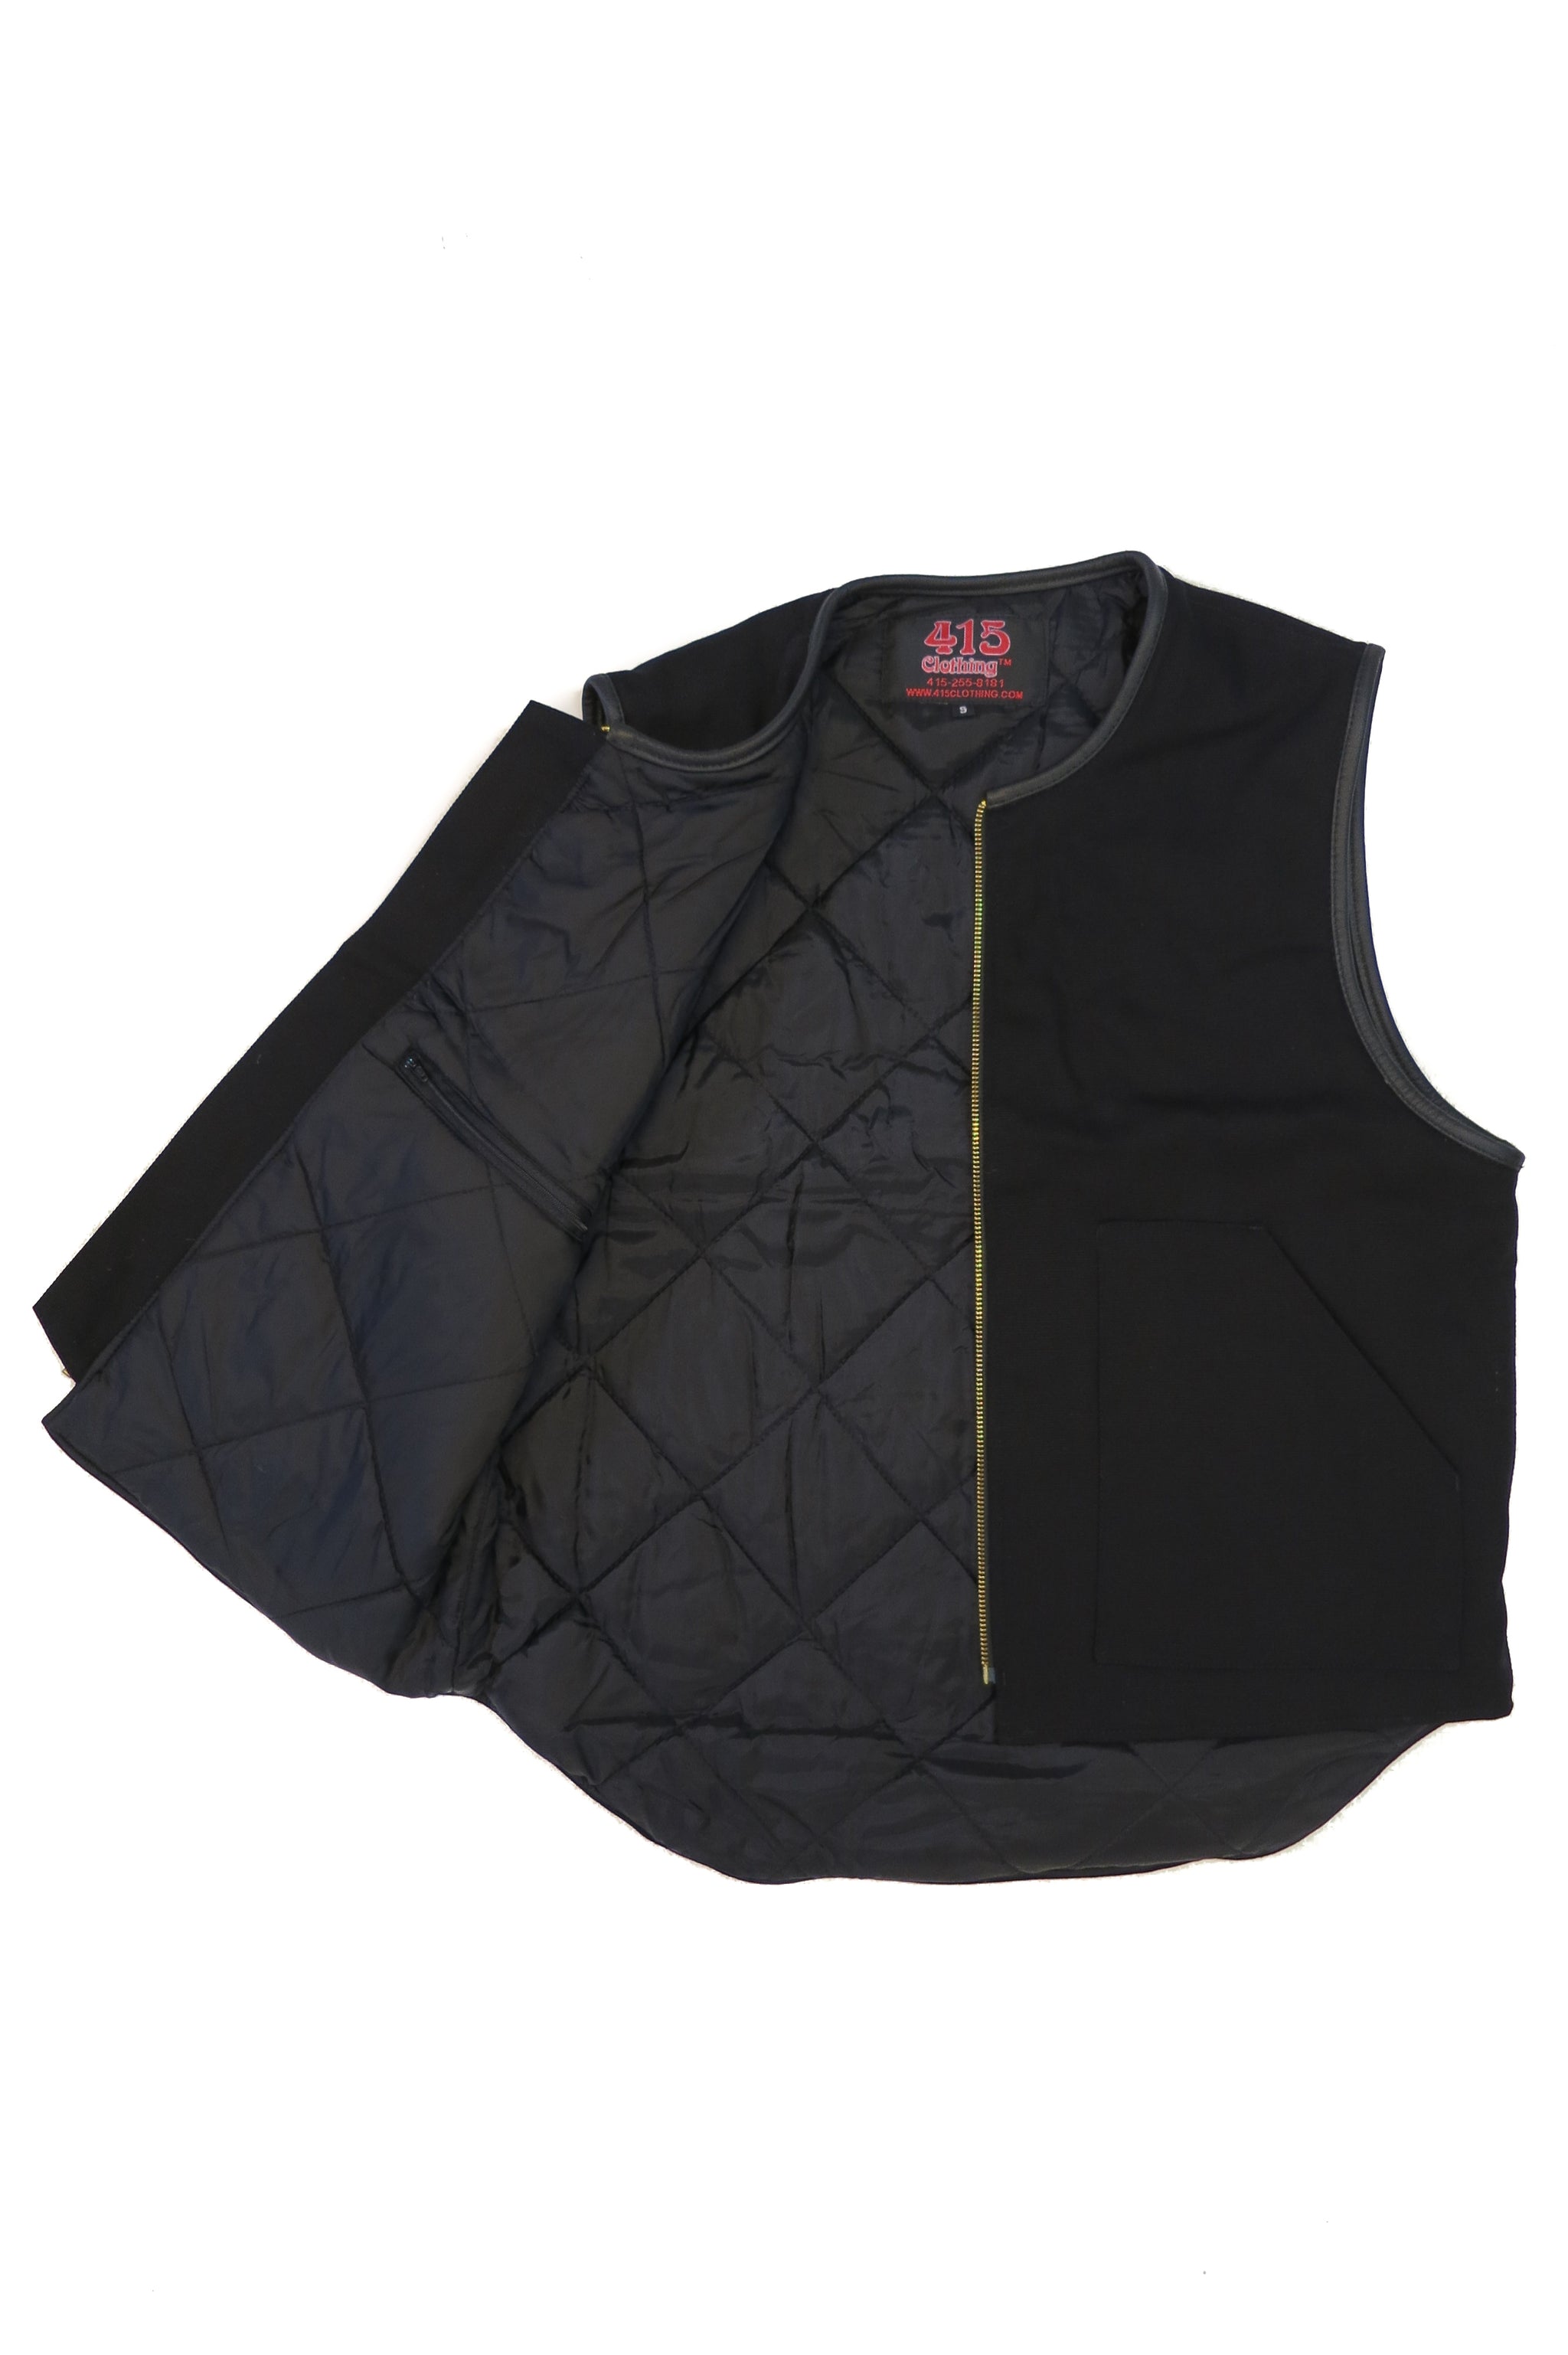 415 Leather Club Style Zipper Vest (With Collar) - 415 Clothing, Inc.